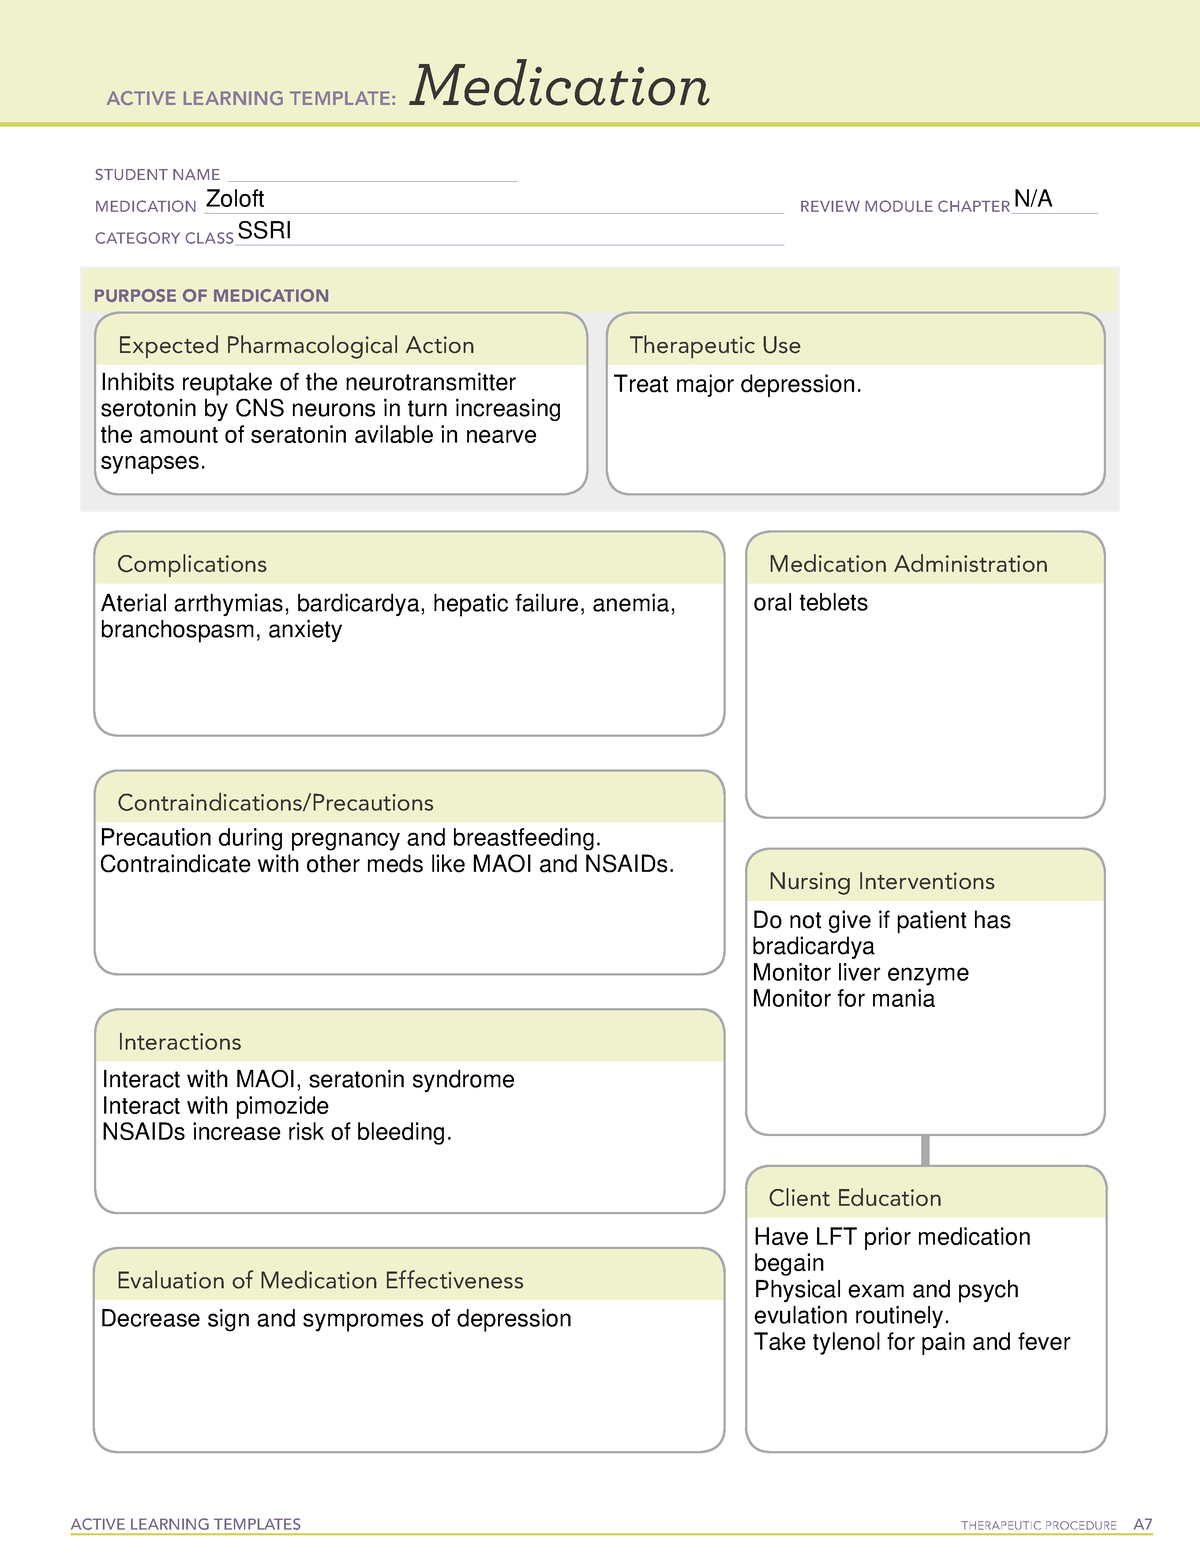 Zoloft medication template from ATI ACTIVE LEARNING TEMPLATES